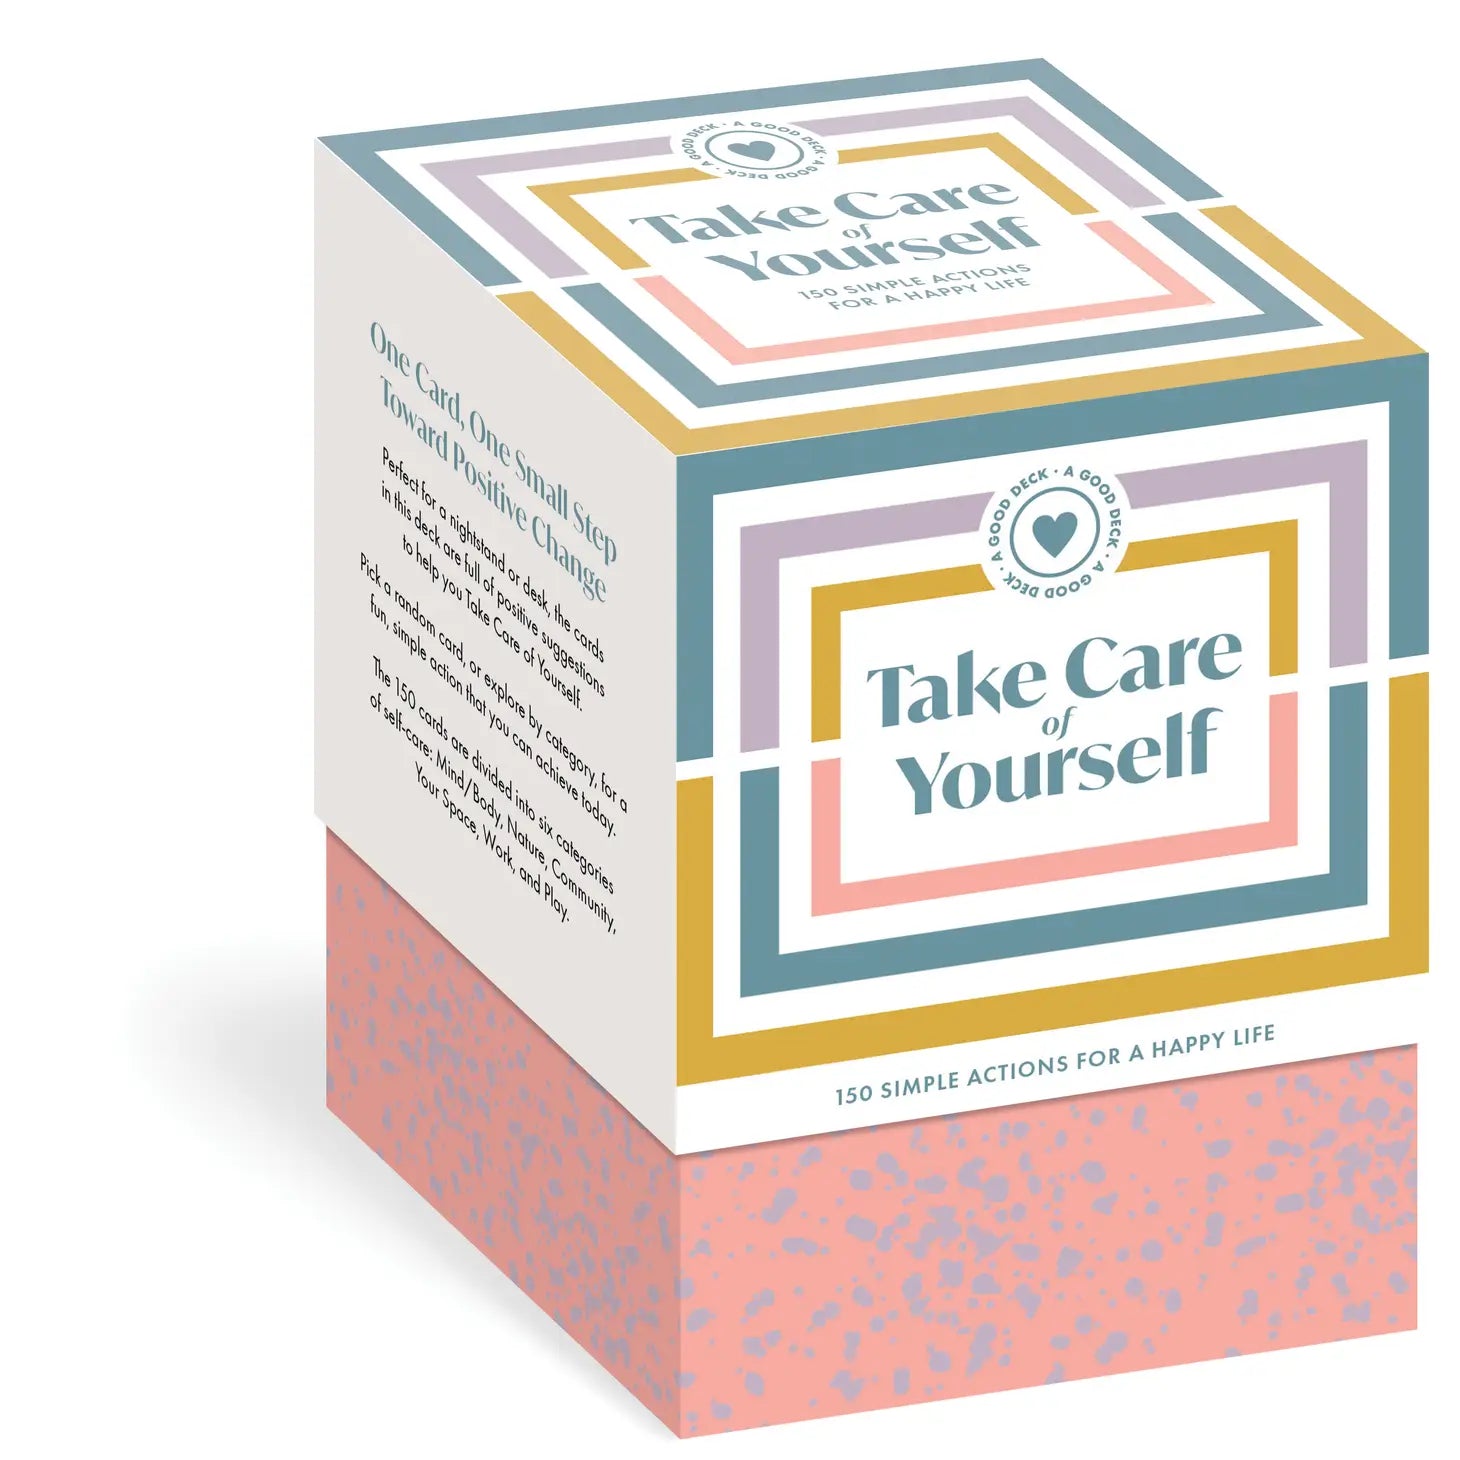 A GOOD DECK:TAKE CARE OF YOURSELF